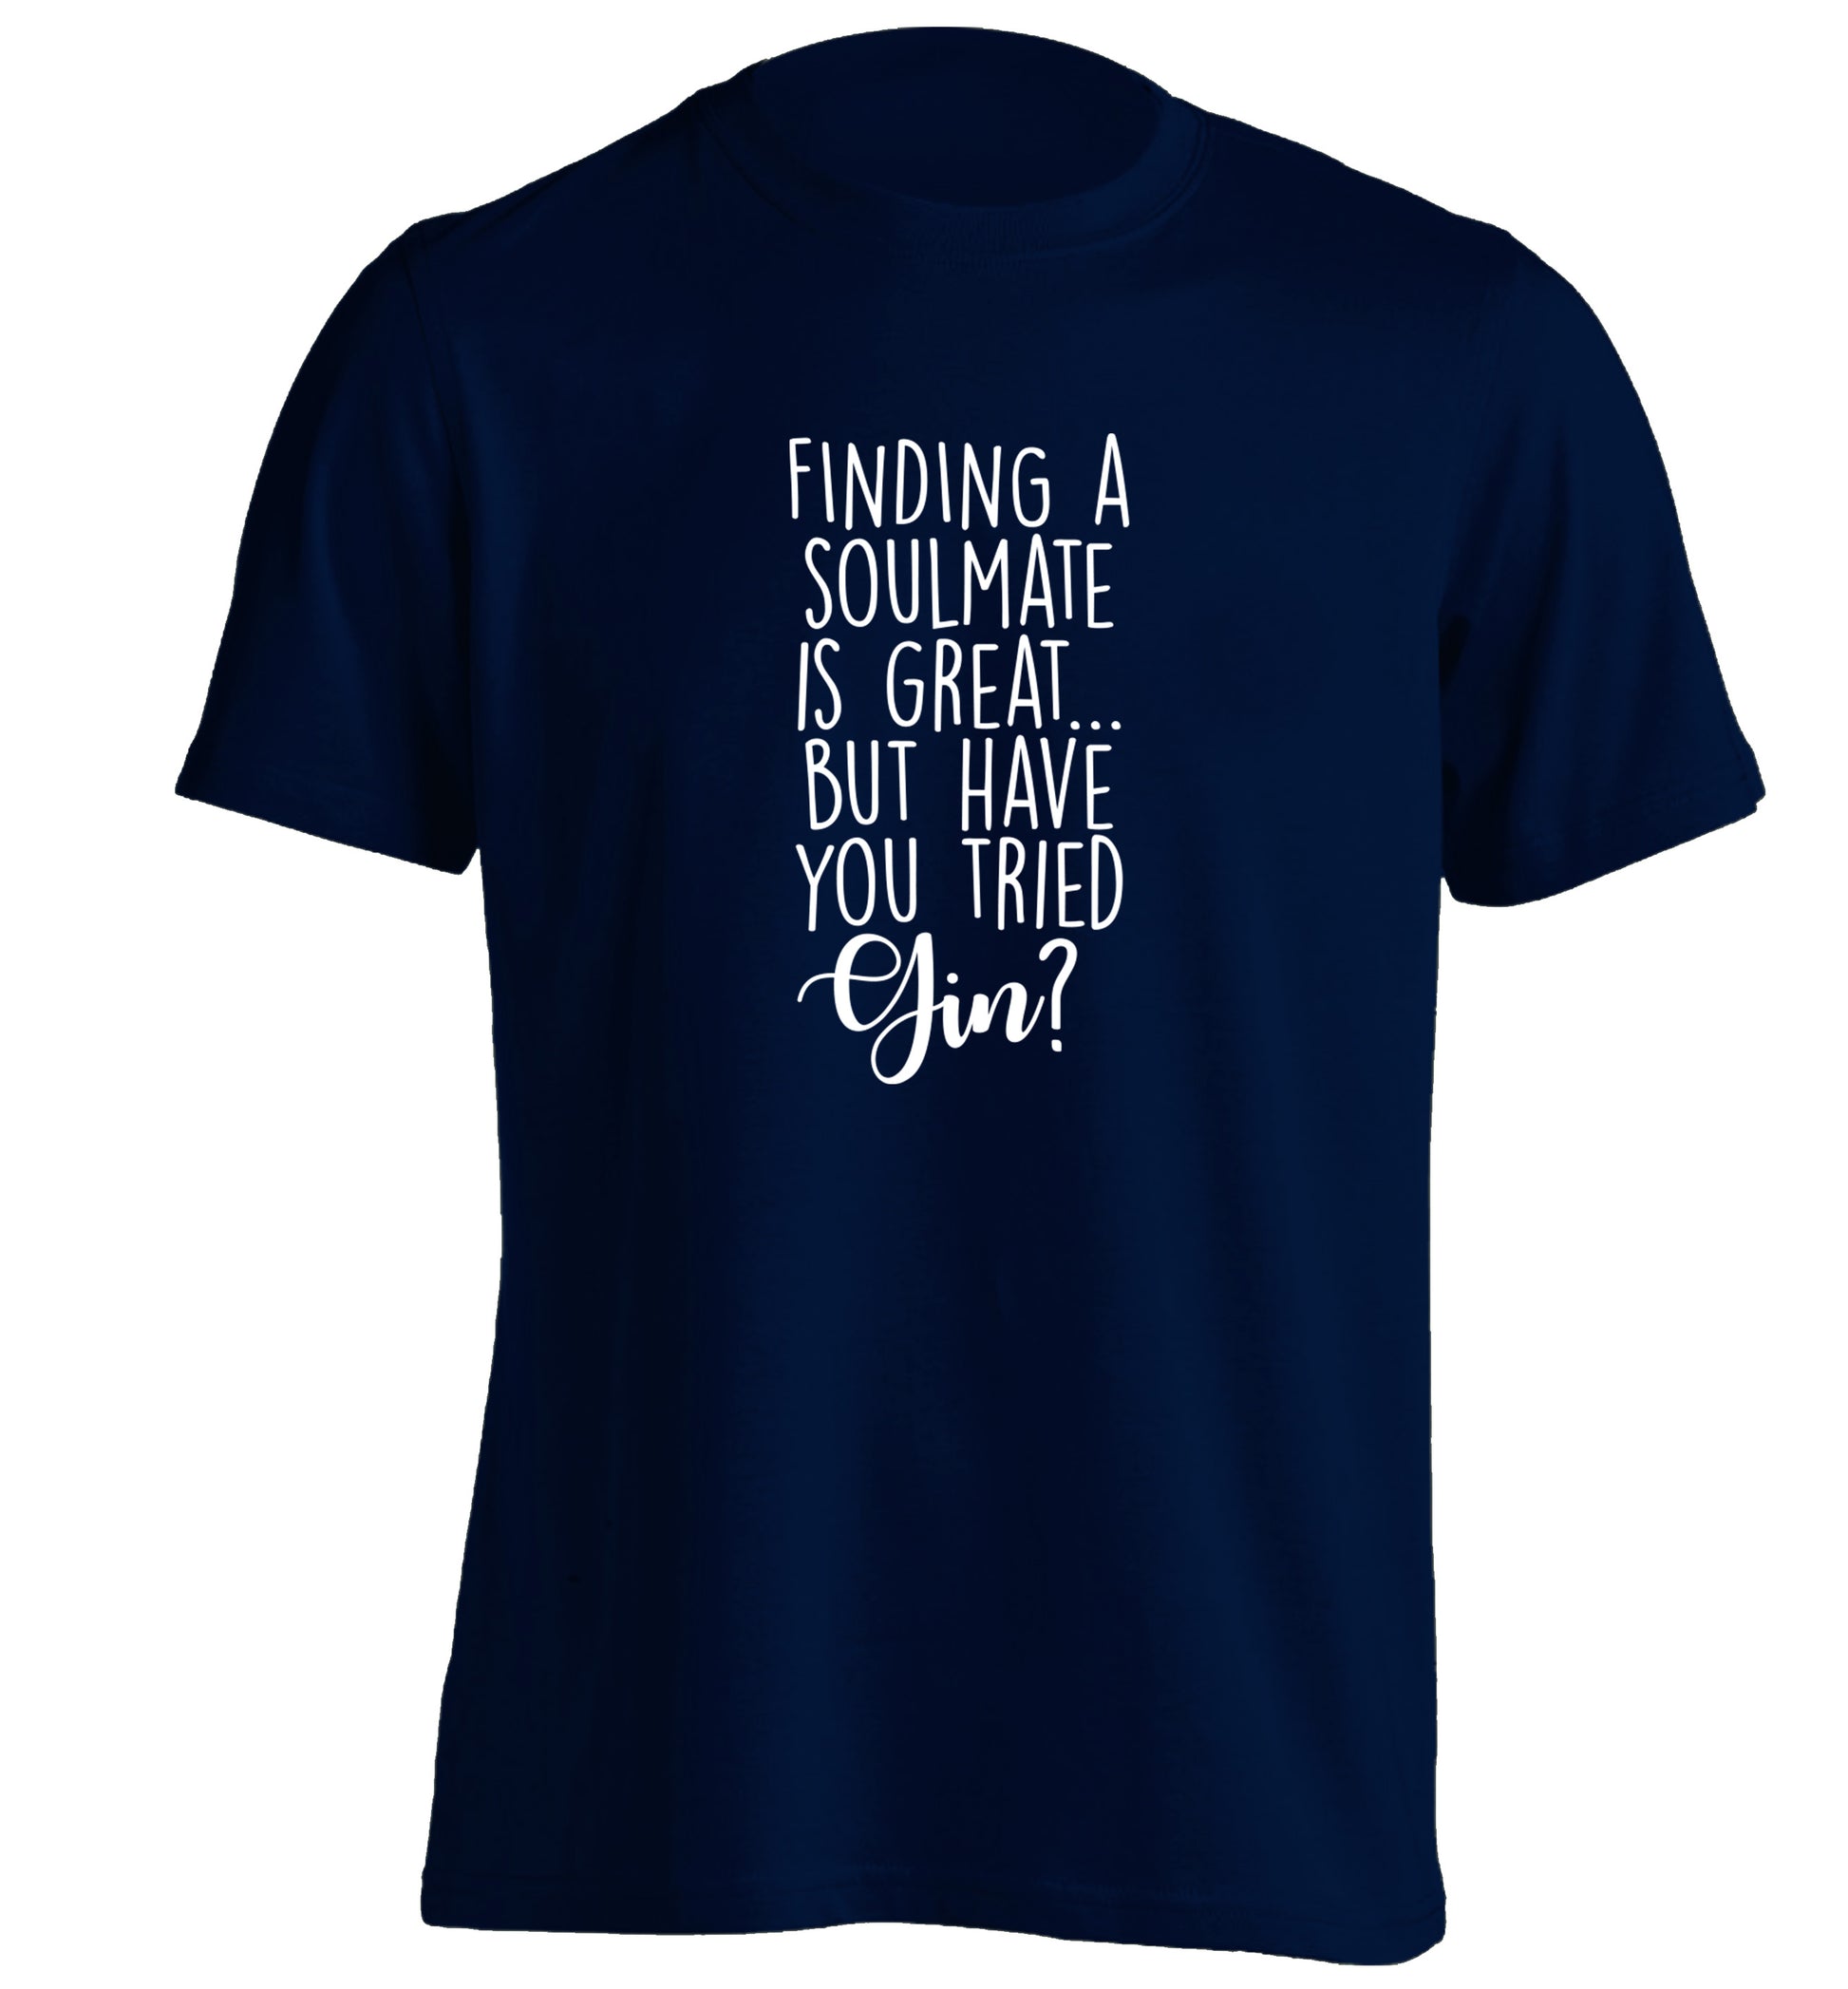 Finding a soulmate is great but have you tried gin? adults unisex navy Tshirt 2XL